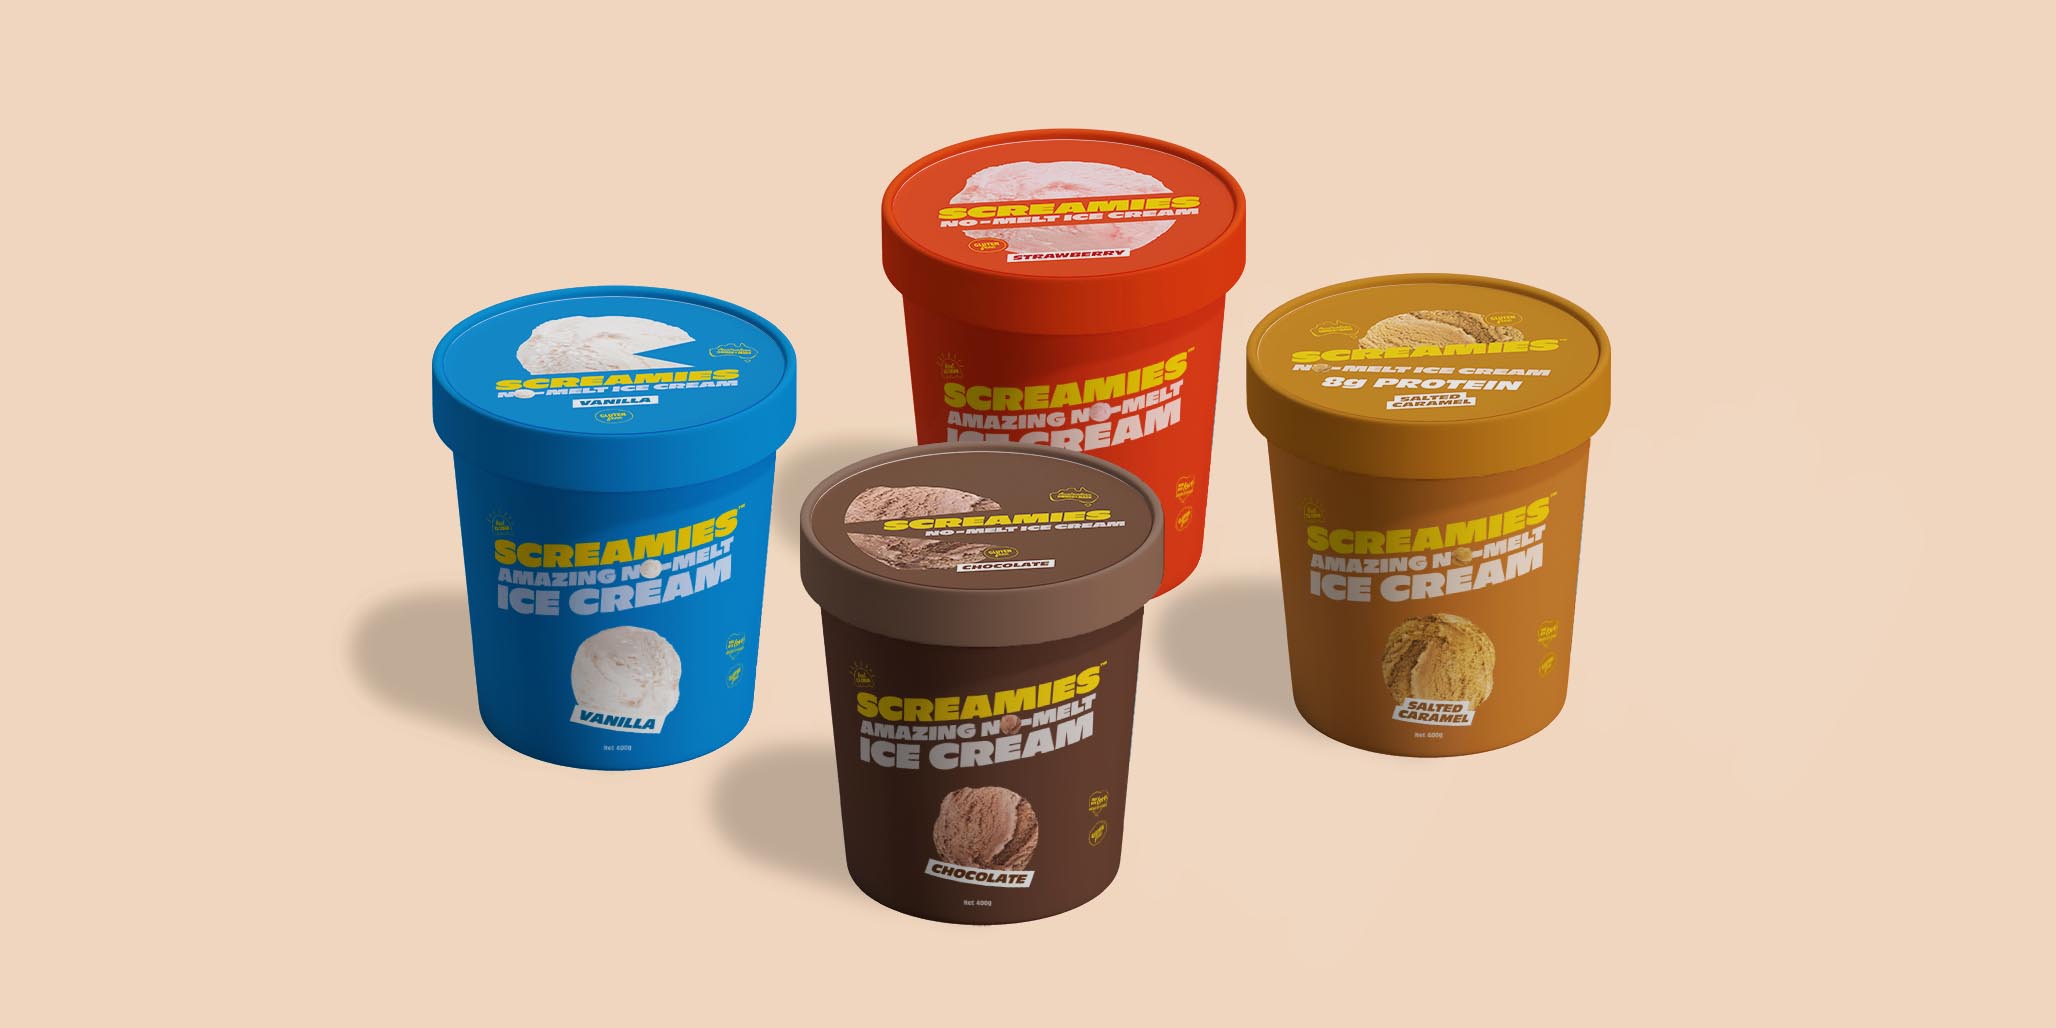 Brand Naming, Brand & Packaging Design project for FMCG food product by Australian Branding Agencies, Percept, image E